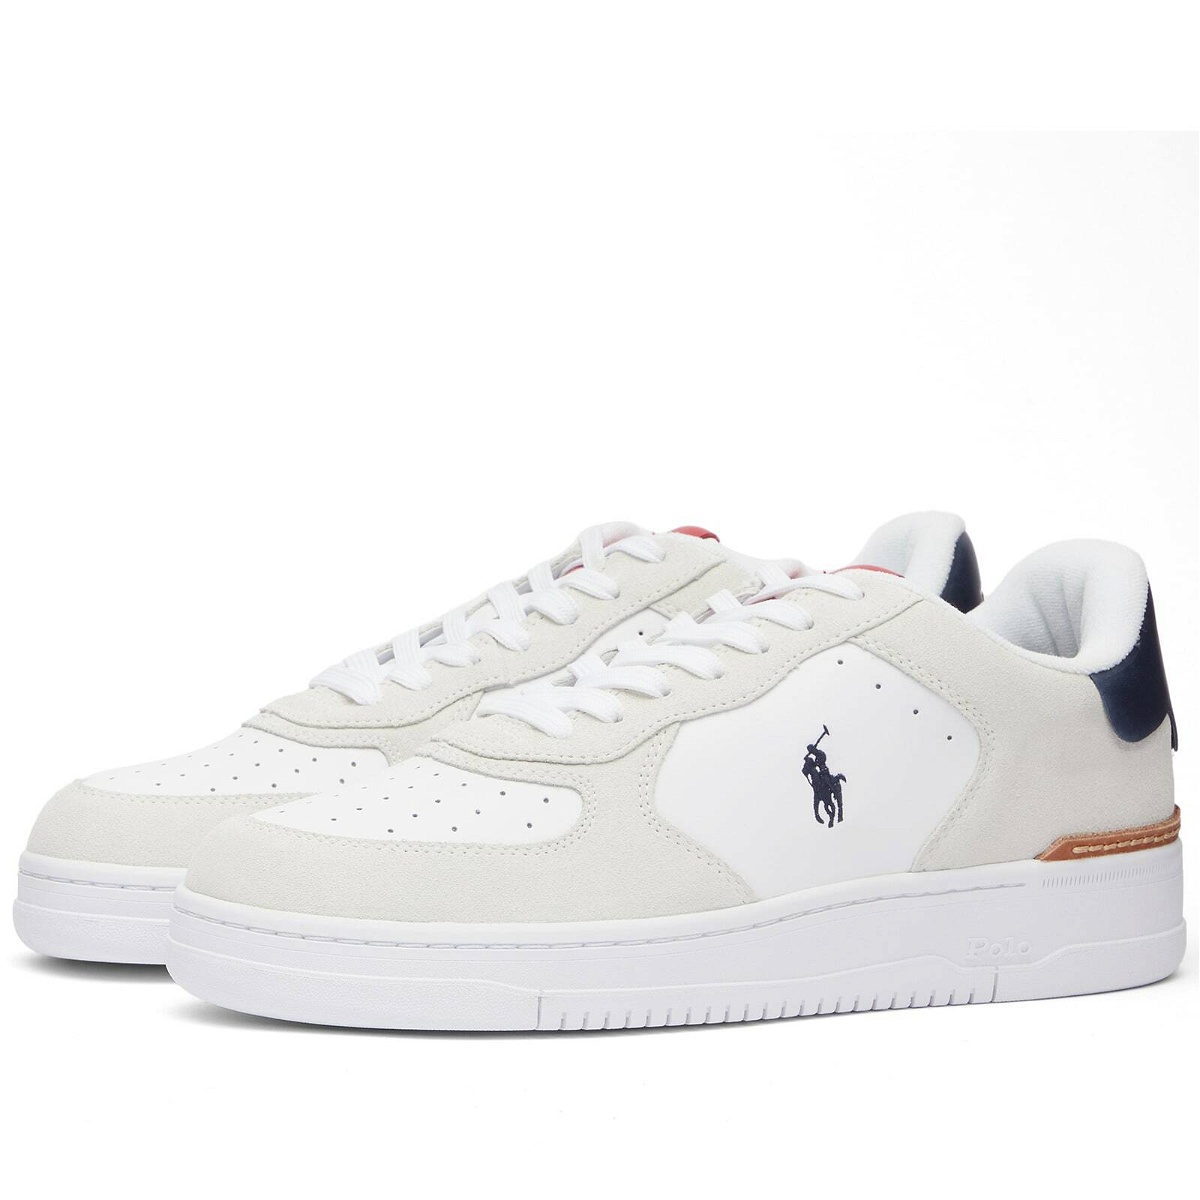 Polo Ralph Lauren Men's Masters Court Sneakers in White/Navy/Red Polo ...